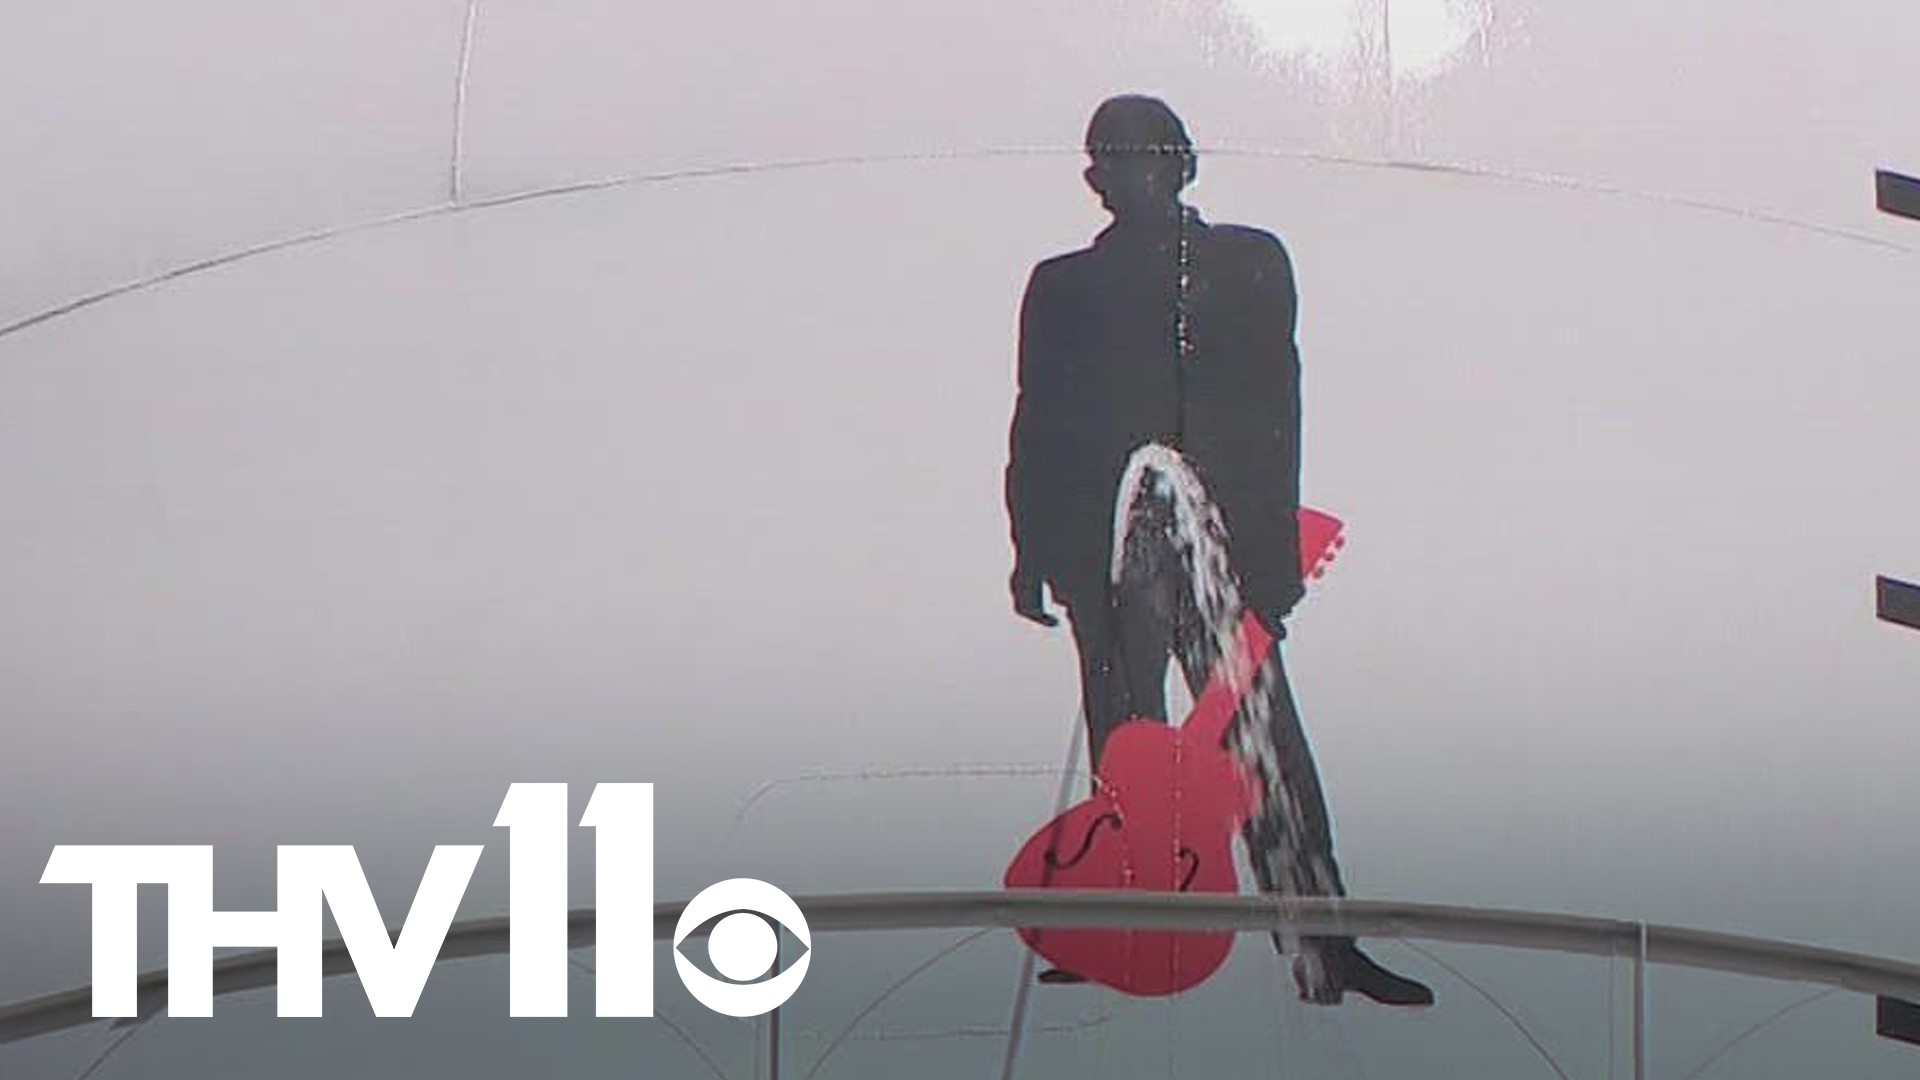 The water tower in Kingland, Arkansas has sprung a leak in a delicate spot...right on the groin of a Johnny Cash silhouette.